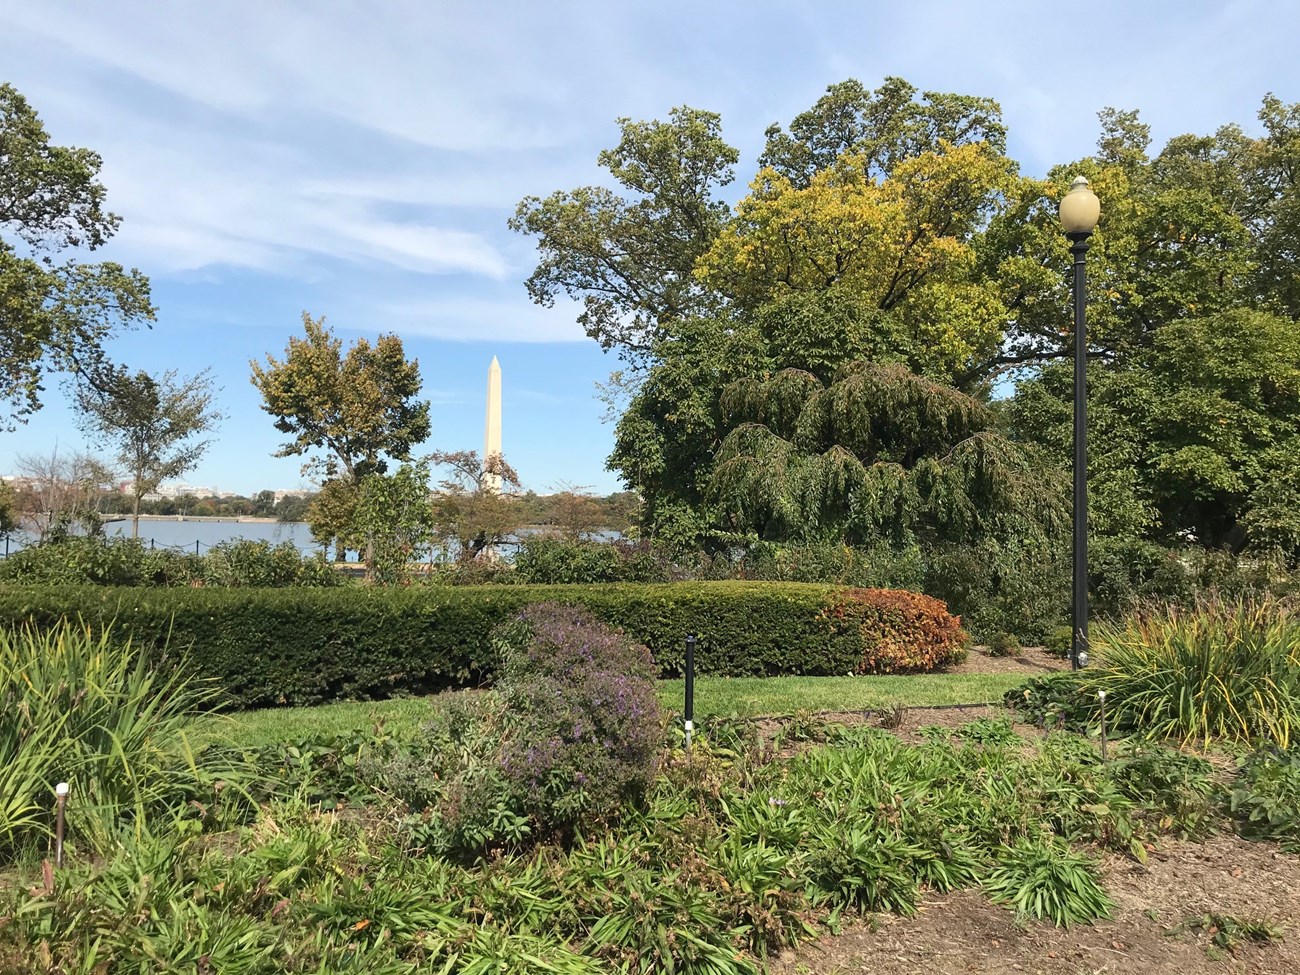 Flower beds, a low hedge, a trees of the George Mason Memorial with the Tidal Basin and Washington Monument in the background.